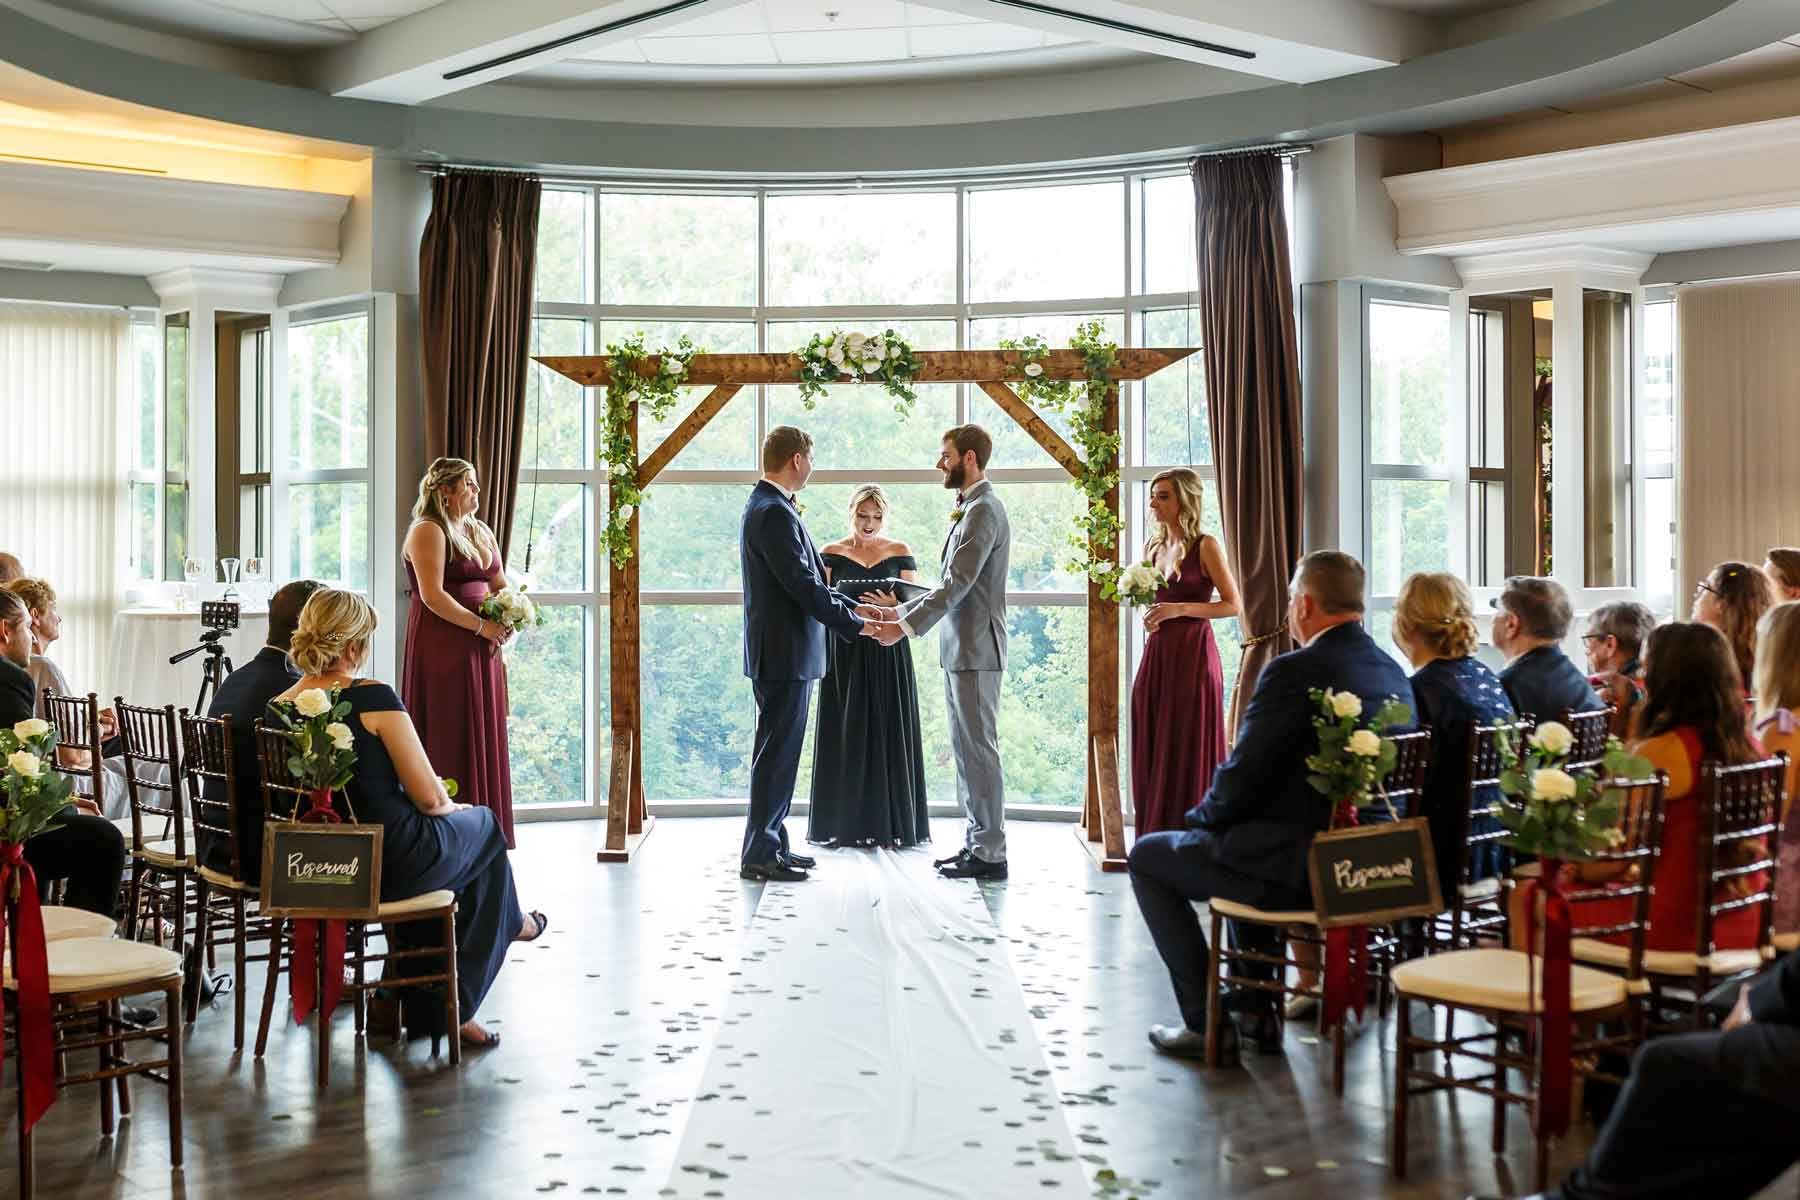 indoor ceremony, photo by Ryan Holland Photography